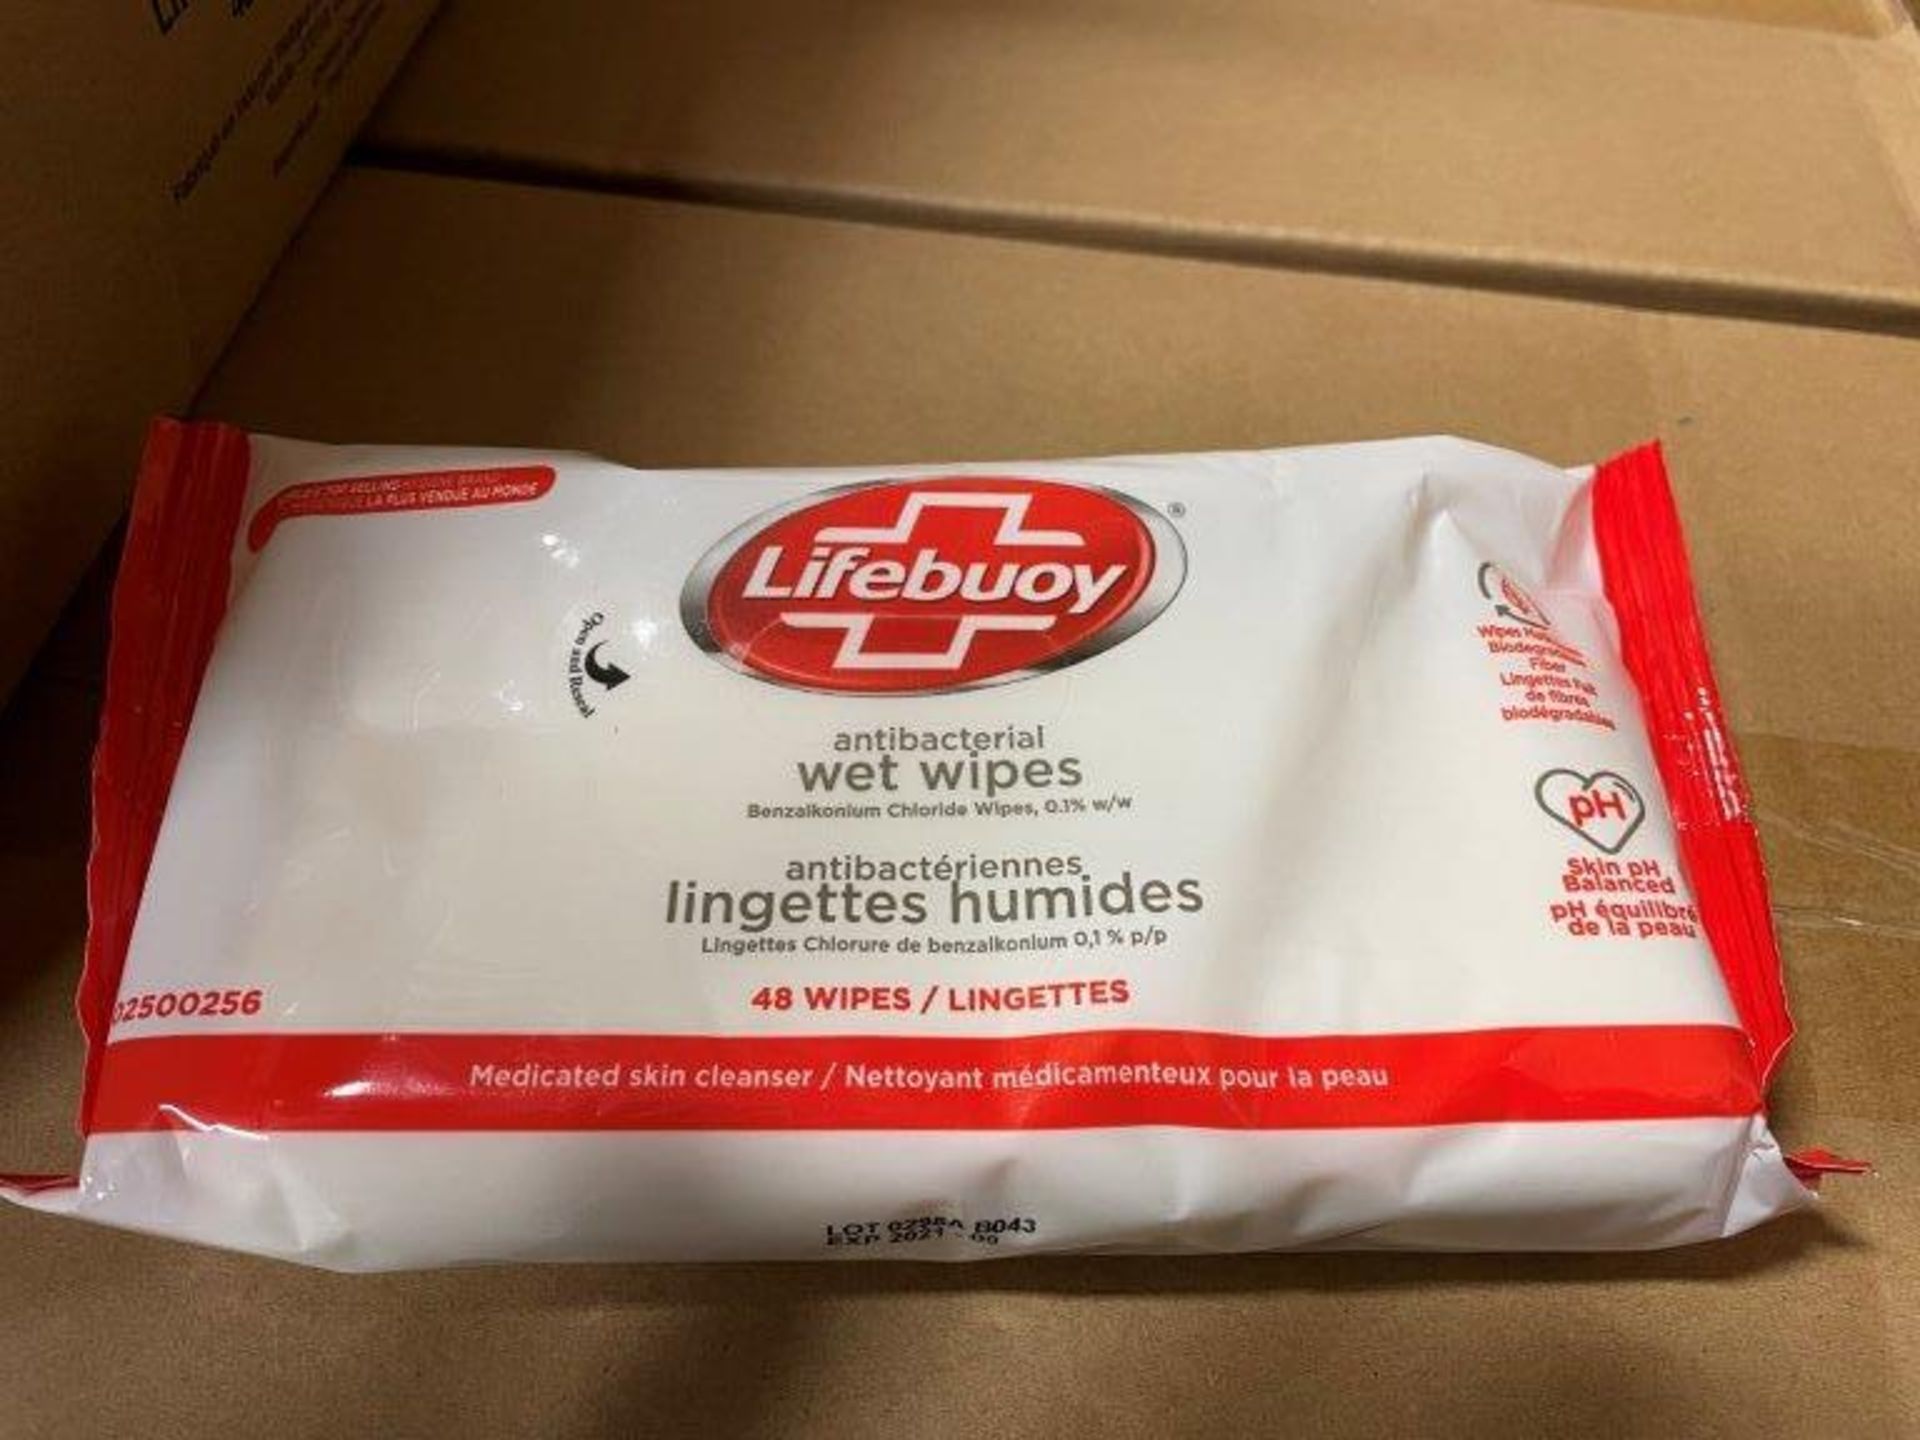 2-BOXES OF LIFEBUOY SANITIZING WIPES 16-PACKAGES PER BOX AND 48-WIPES PER PACKAGE AUGUST 2021